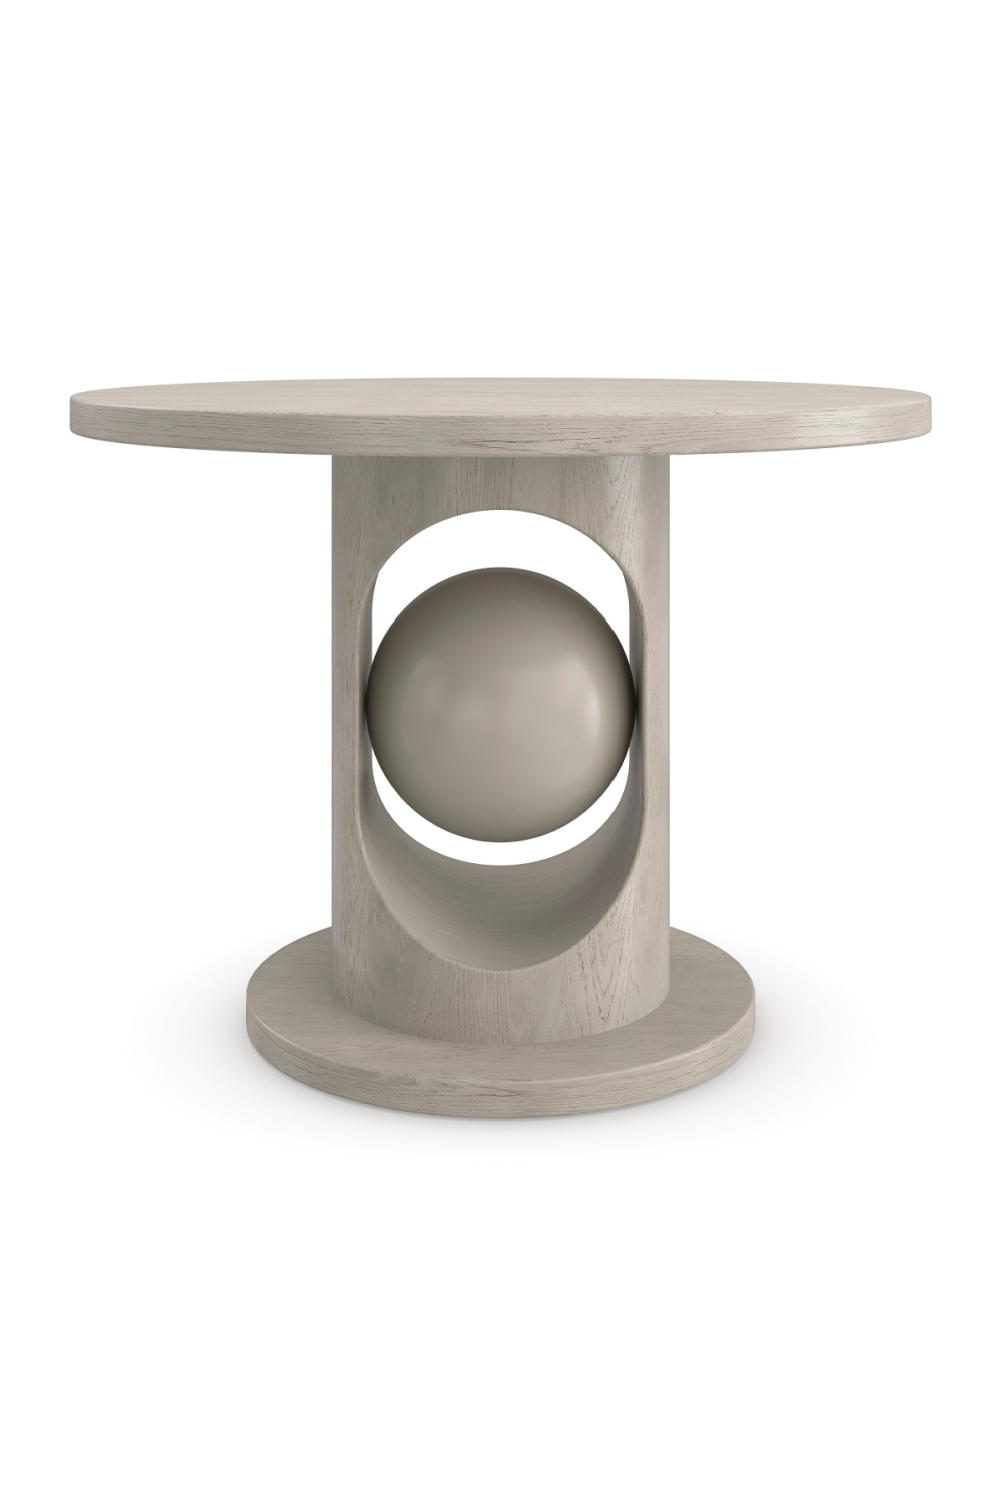 Image of Taupe Pedestal Dining Table | Caracole Pearl